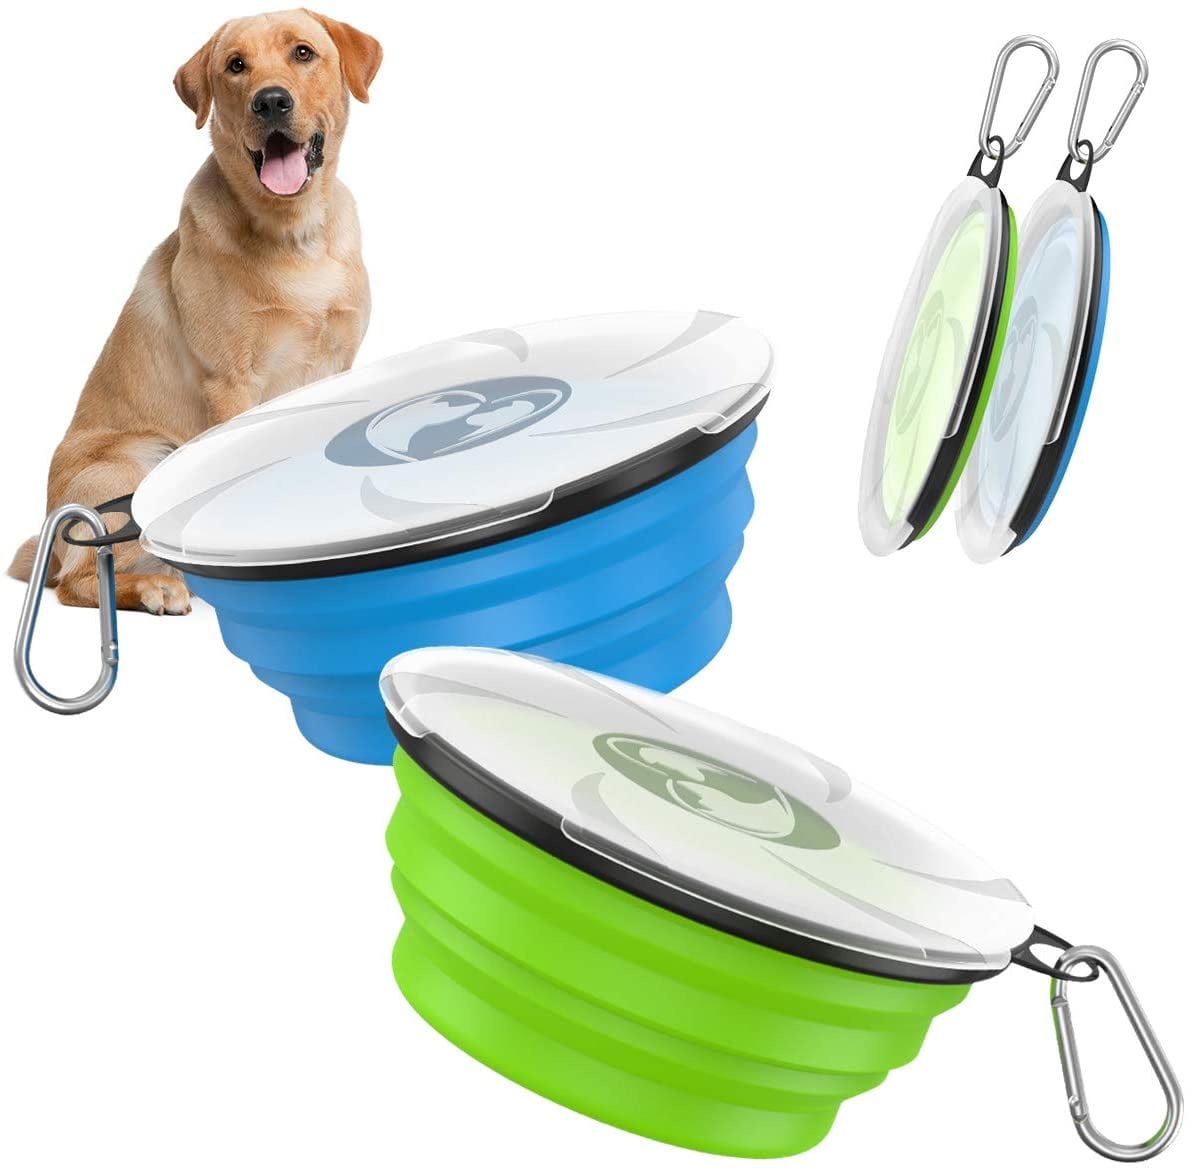 Portable Silicone Food& Water Travel Pet Bowl with Lids Expandable Pet Feeding Watering Cup Dish for Walking 2 Packs Collapsible Dog Bowl Kennels & Camping Blue& Green 